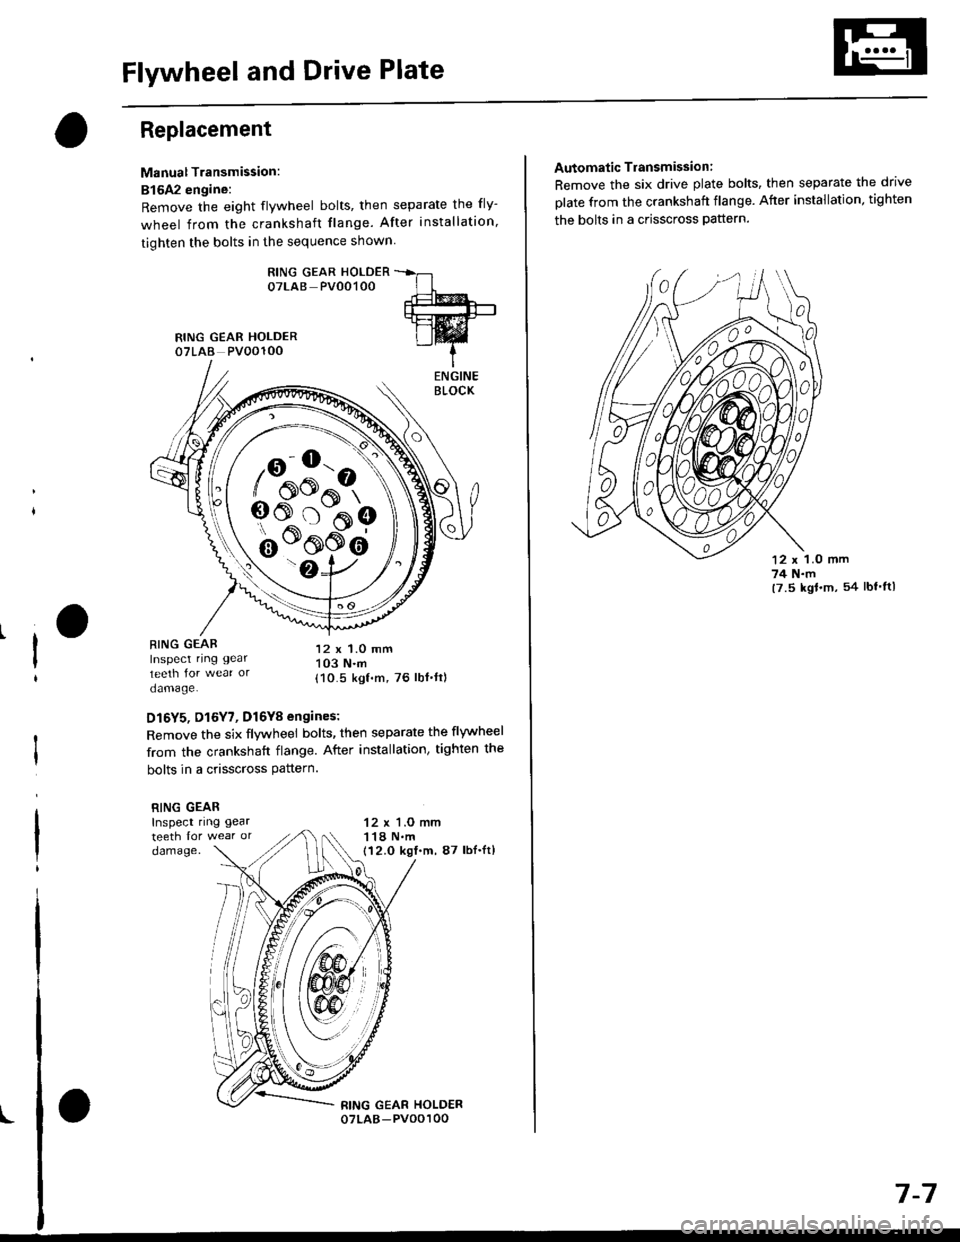 HONDA CIVIC 1999 6.G Workshop Manual Flywheel and Drive Plate
Replacement
Manual Transmission:
816A2 engine:
Remove the eight flywheel bolts, then separate the fly-
wheel from the crankshaft flange. After installation
tiohten the bolts 